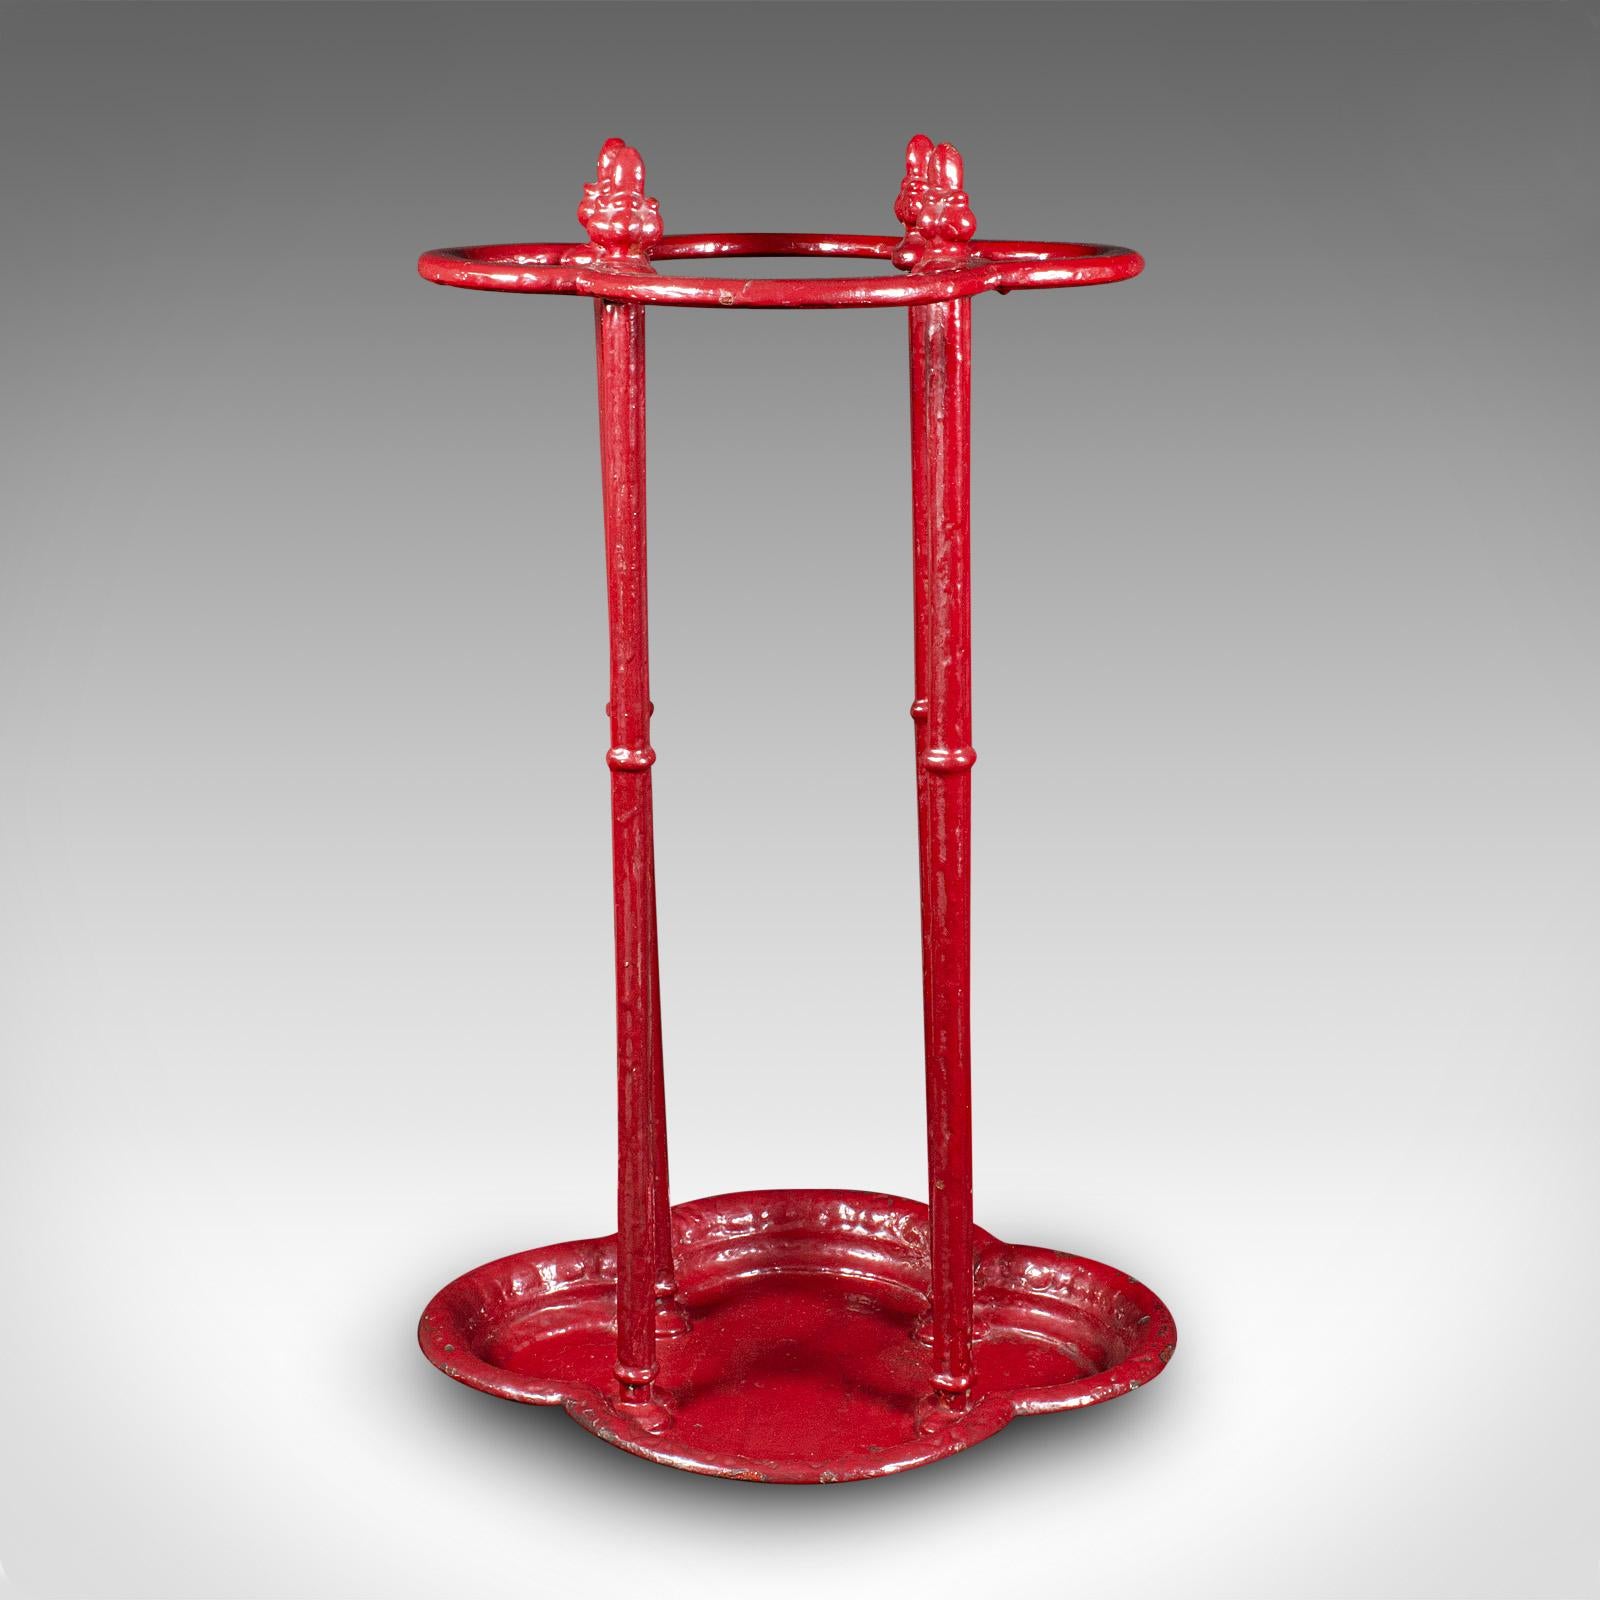 This is an antique decorative stick stand. An English, painted cast iron umbrella rack, dating to the early Victorian period, circa 1850.

Strikingly presented stand with appealing forms and finish
Displays a desirable aged patina throughout
Robust